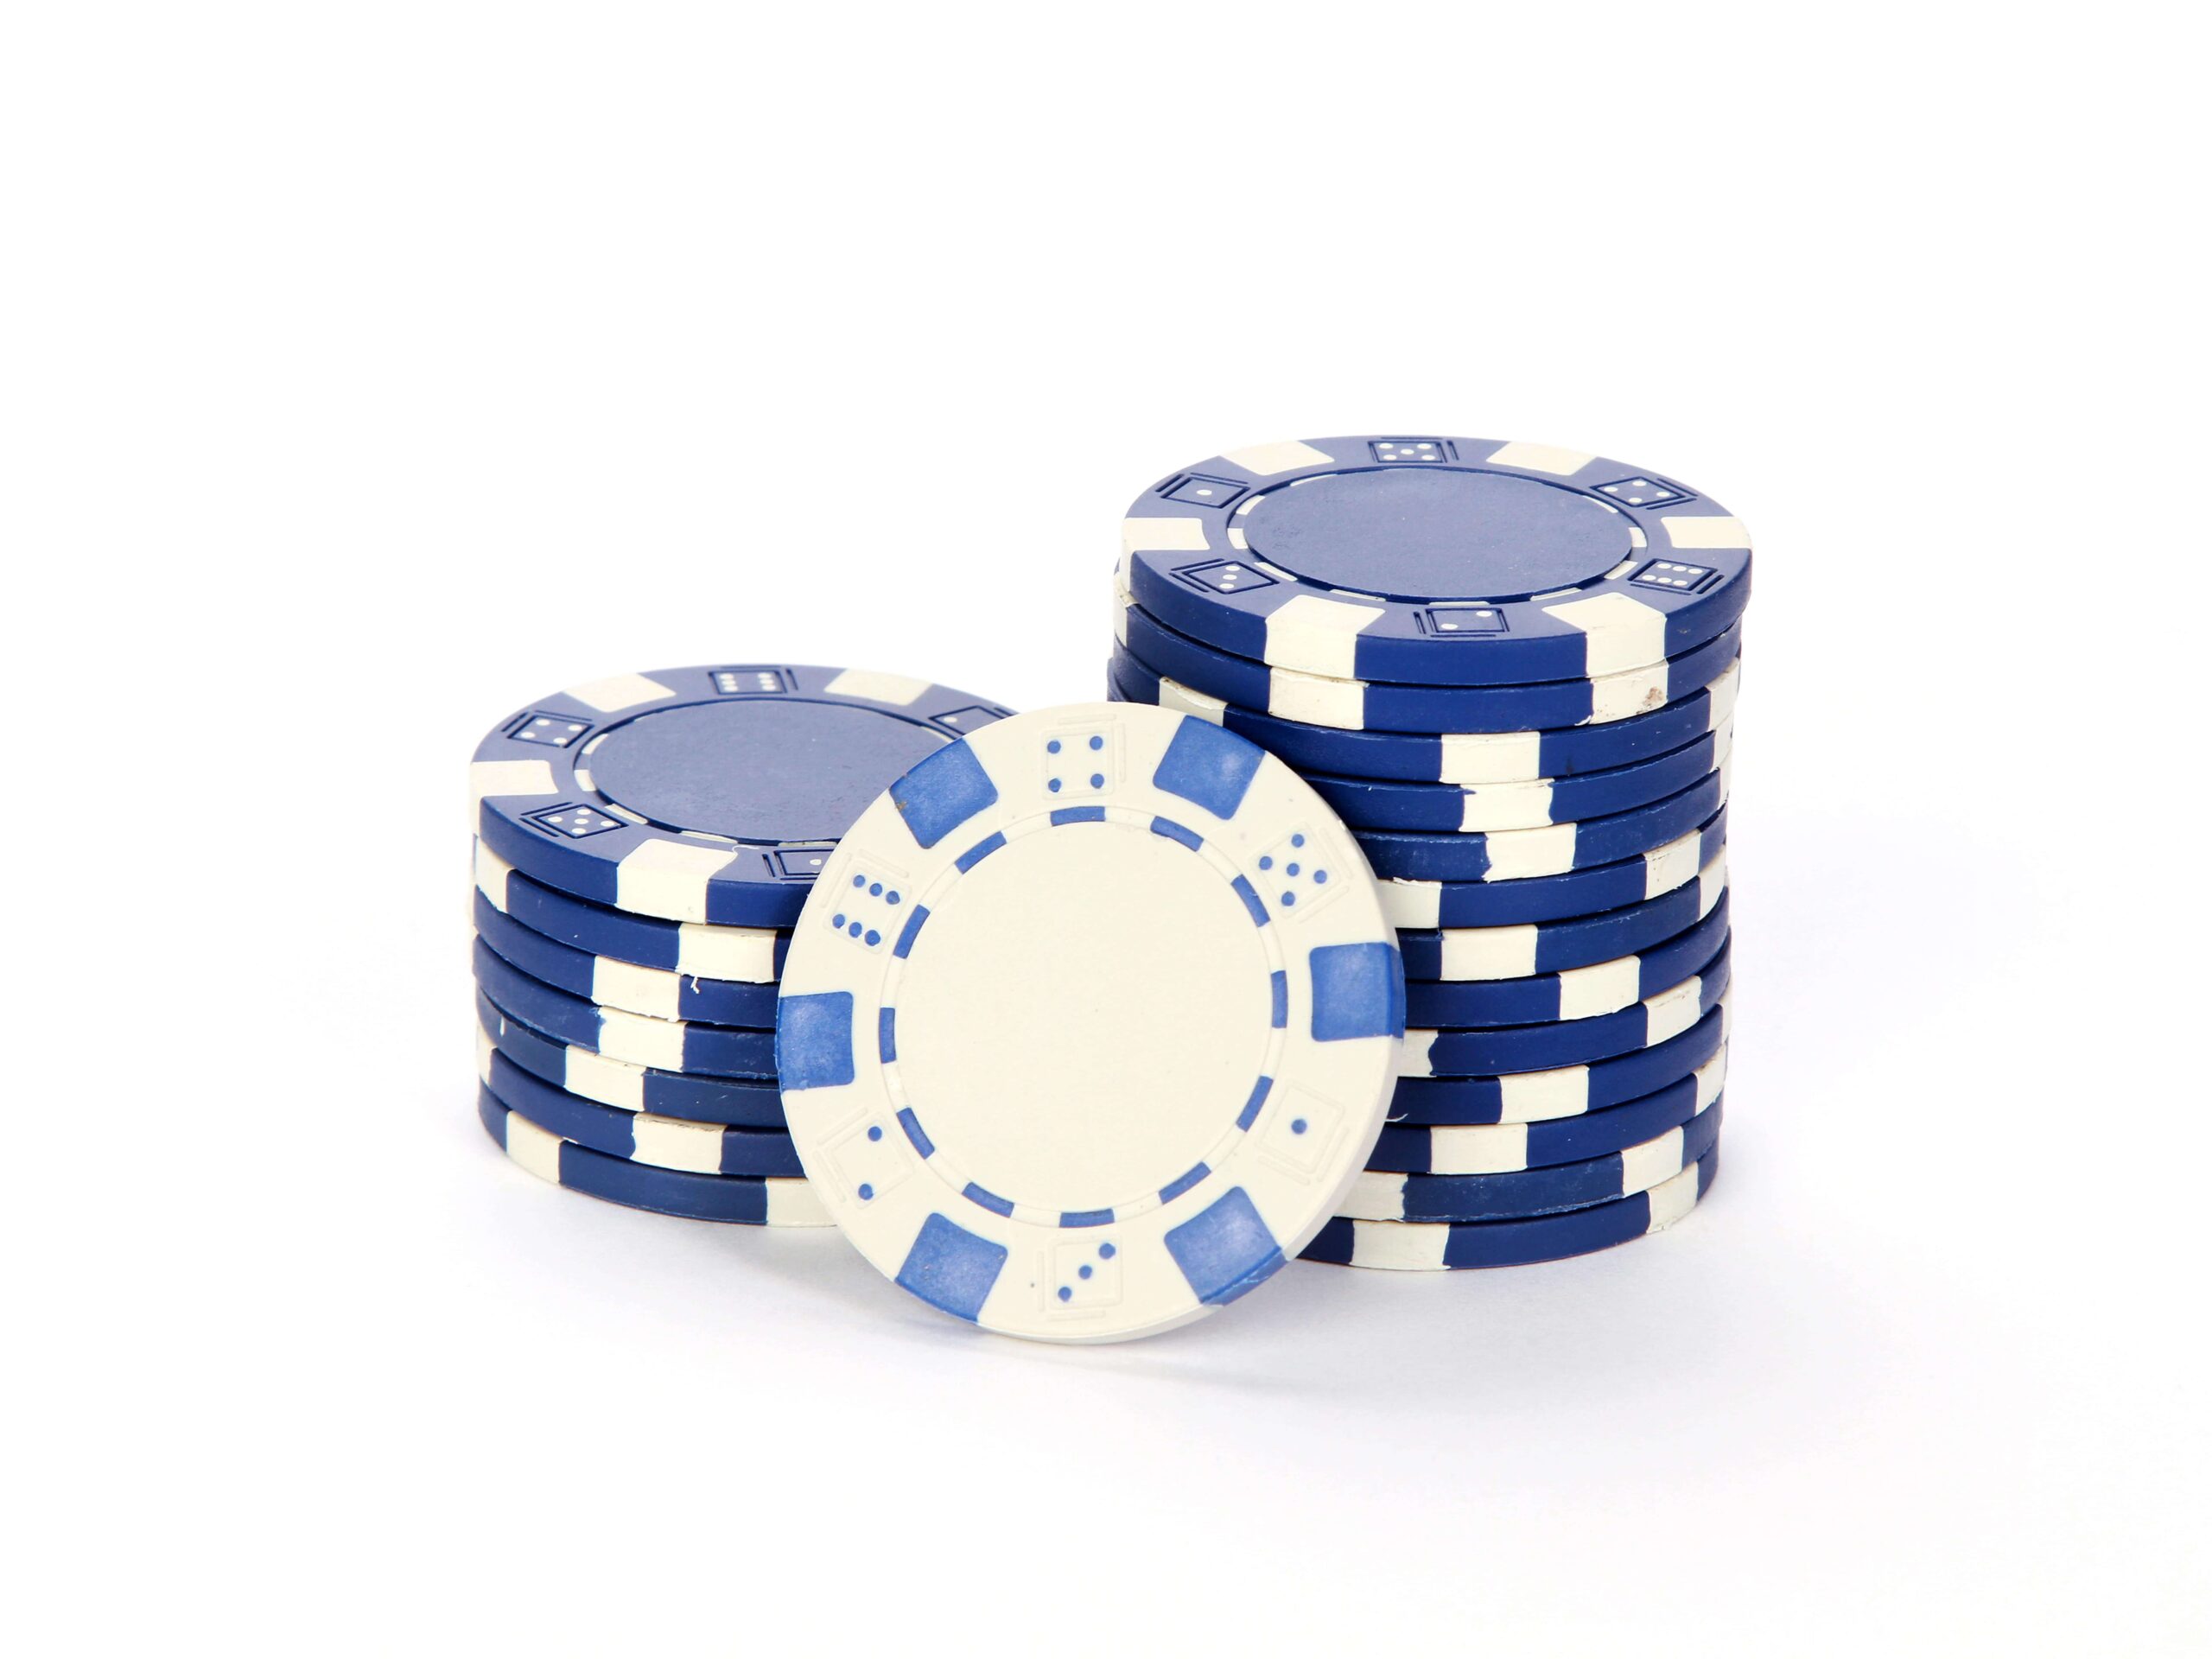 Poker chips stacked